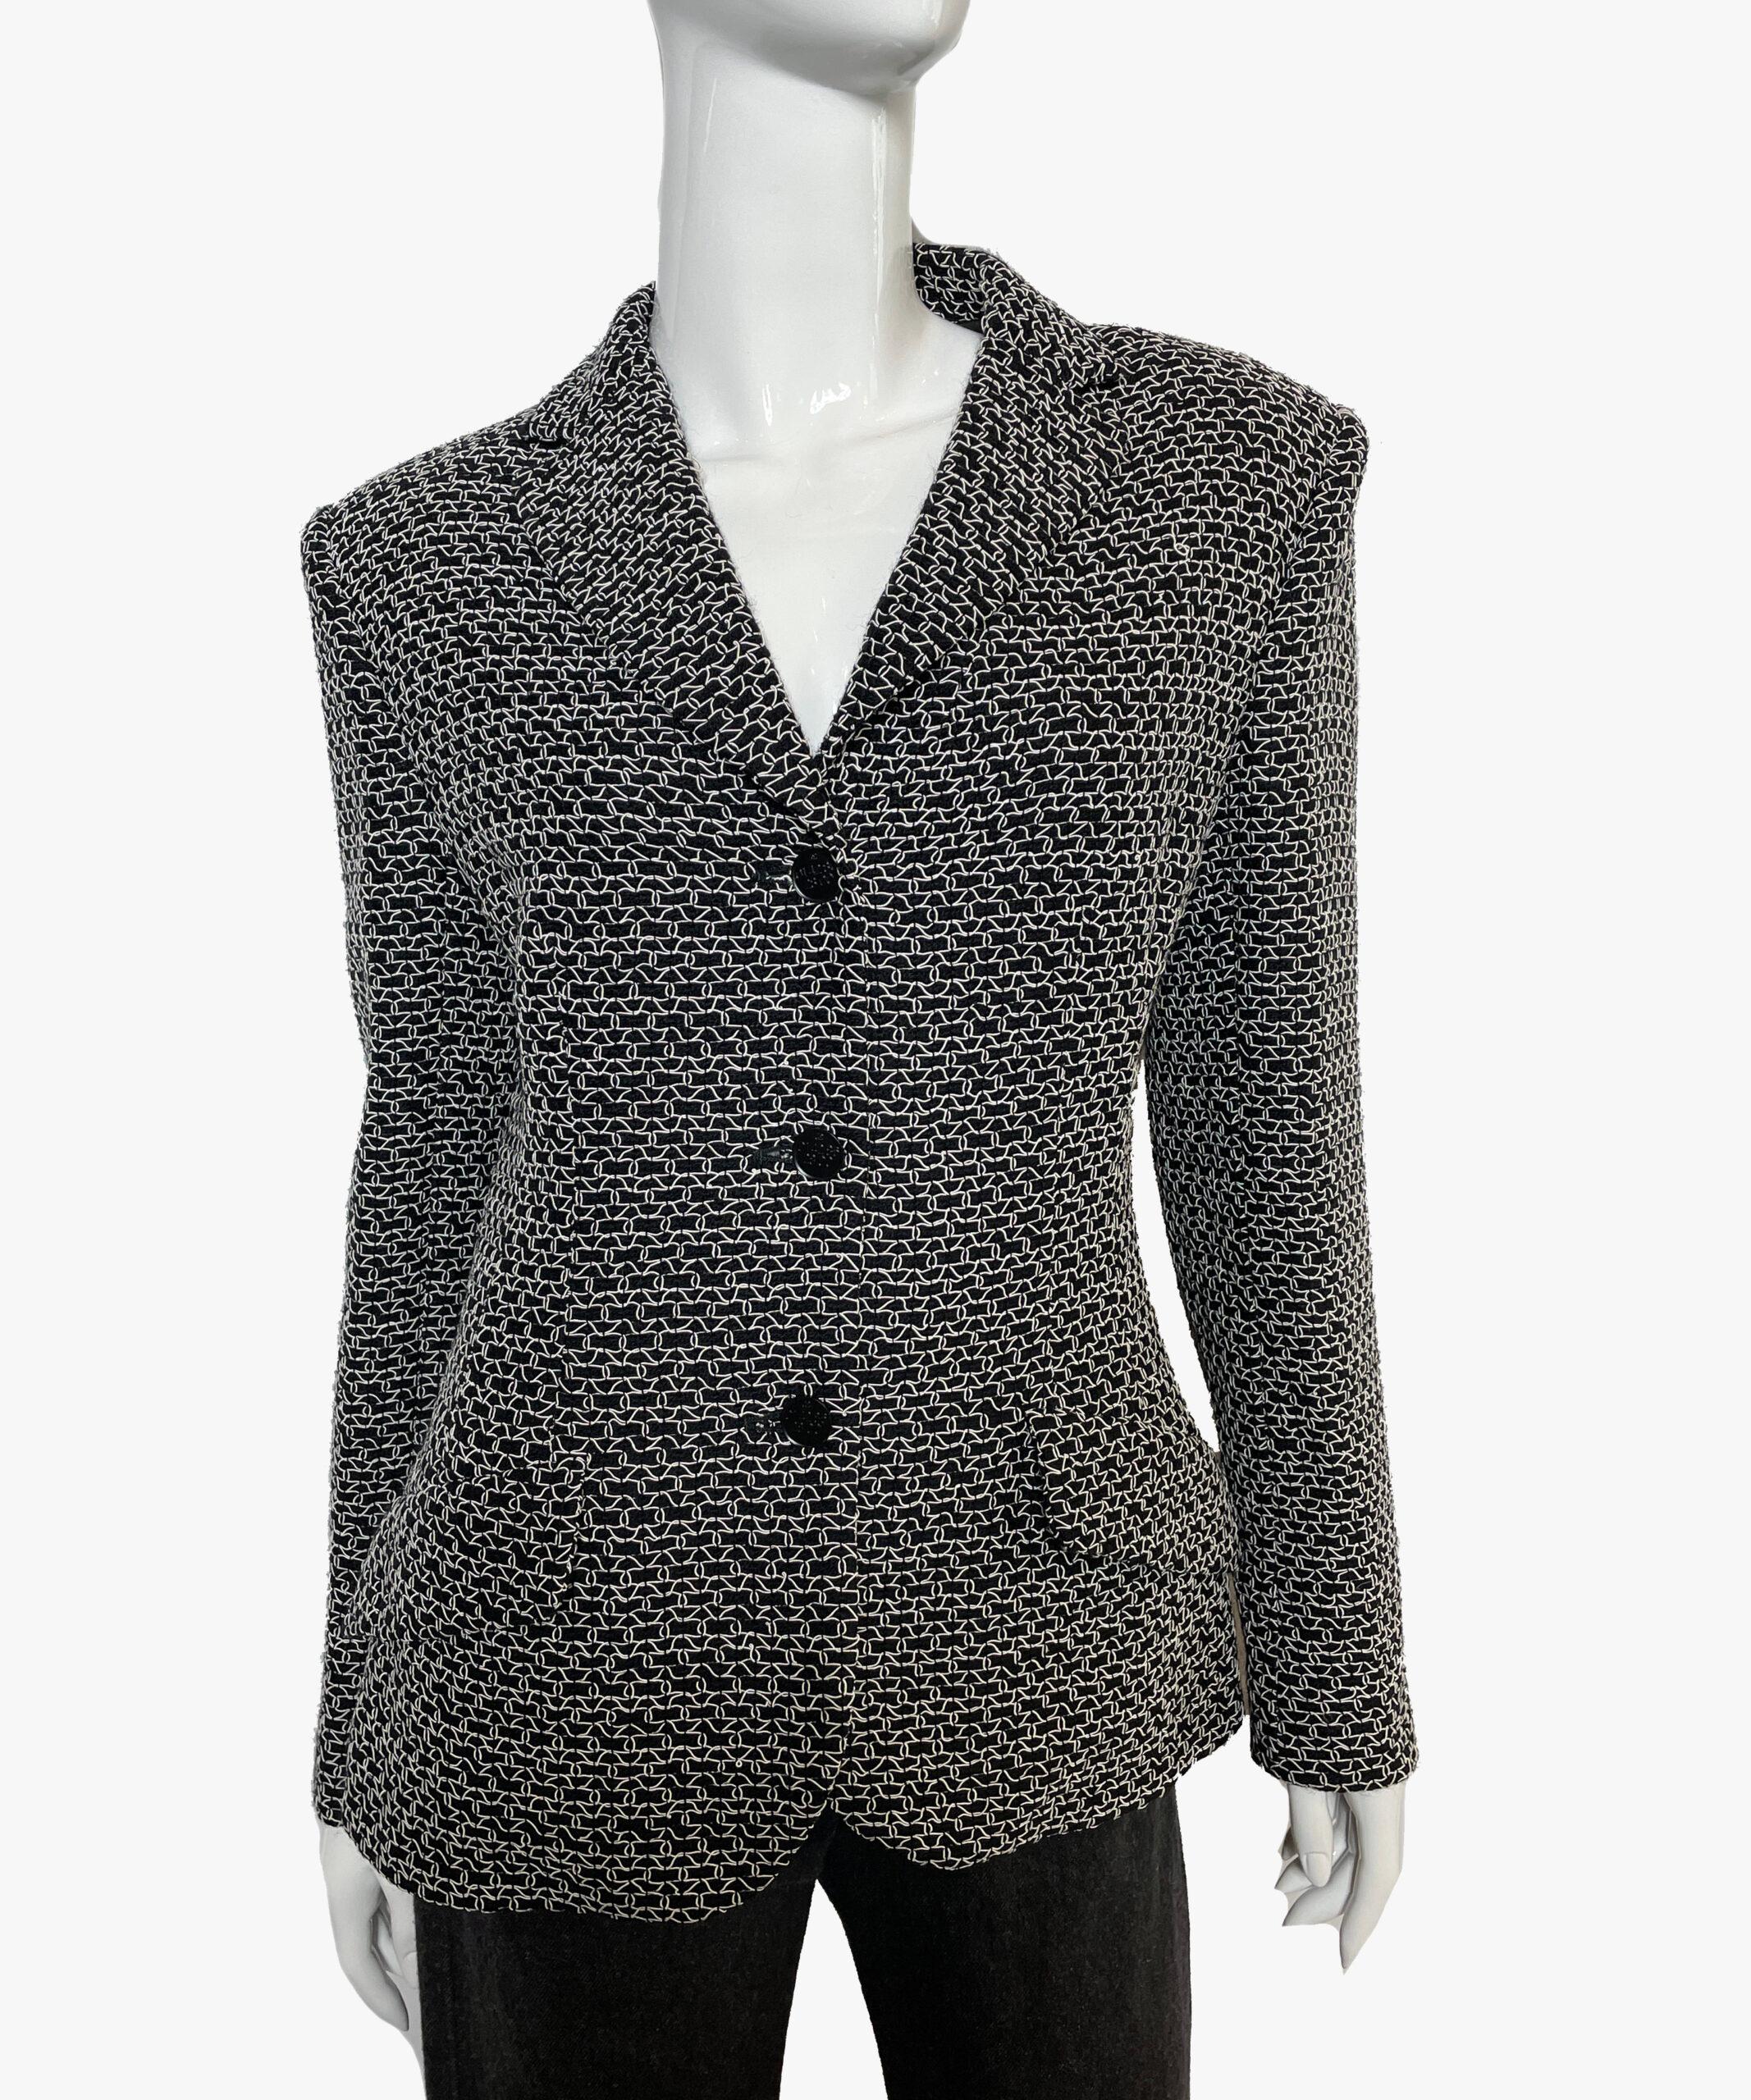 Chanel Vintage Blazer Fall/Winter, 1998 Collection

Vintage Chanel blazer from the Fall/Winter 1998 Collection by Karl Lagerfeld

Additional information:
Fabric: 51% Wool, 44% Viscose, 5% Nylon; Lining 95% Silk, 5% Lycra
Size: M  US6, FR38
Bust: